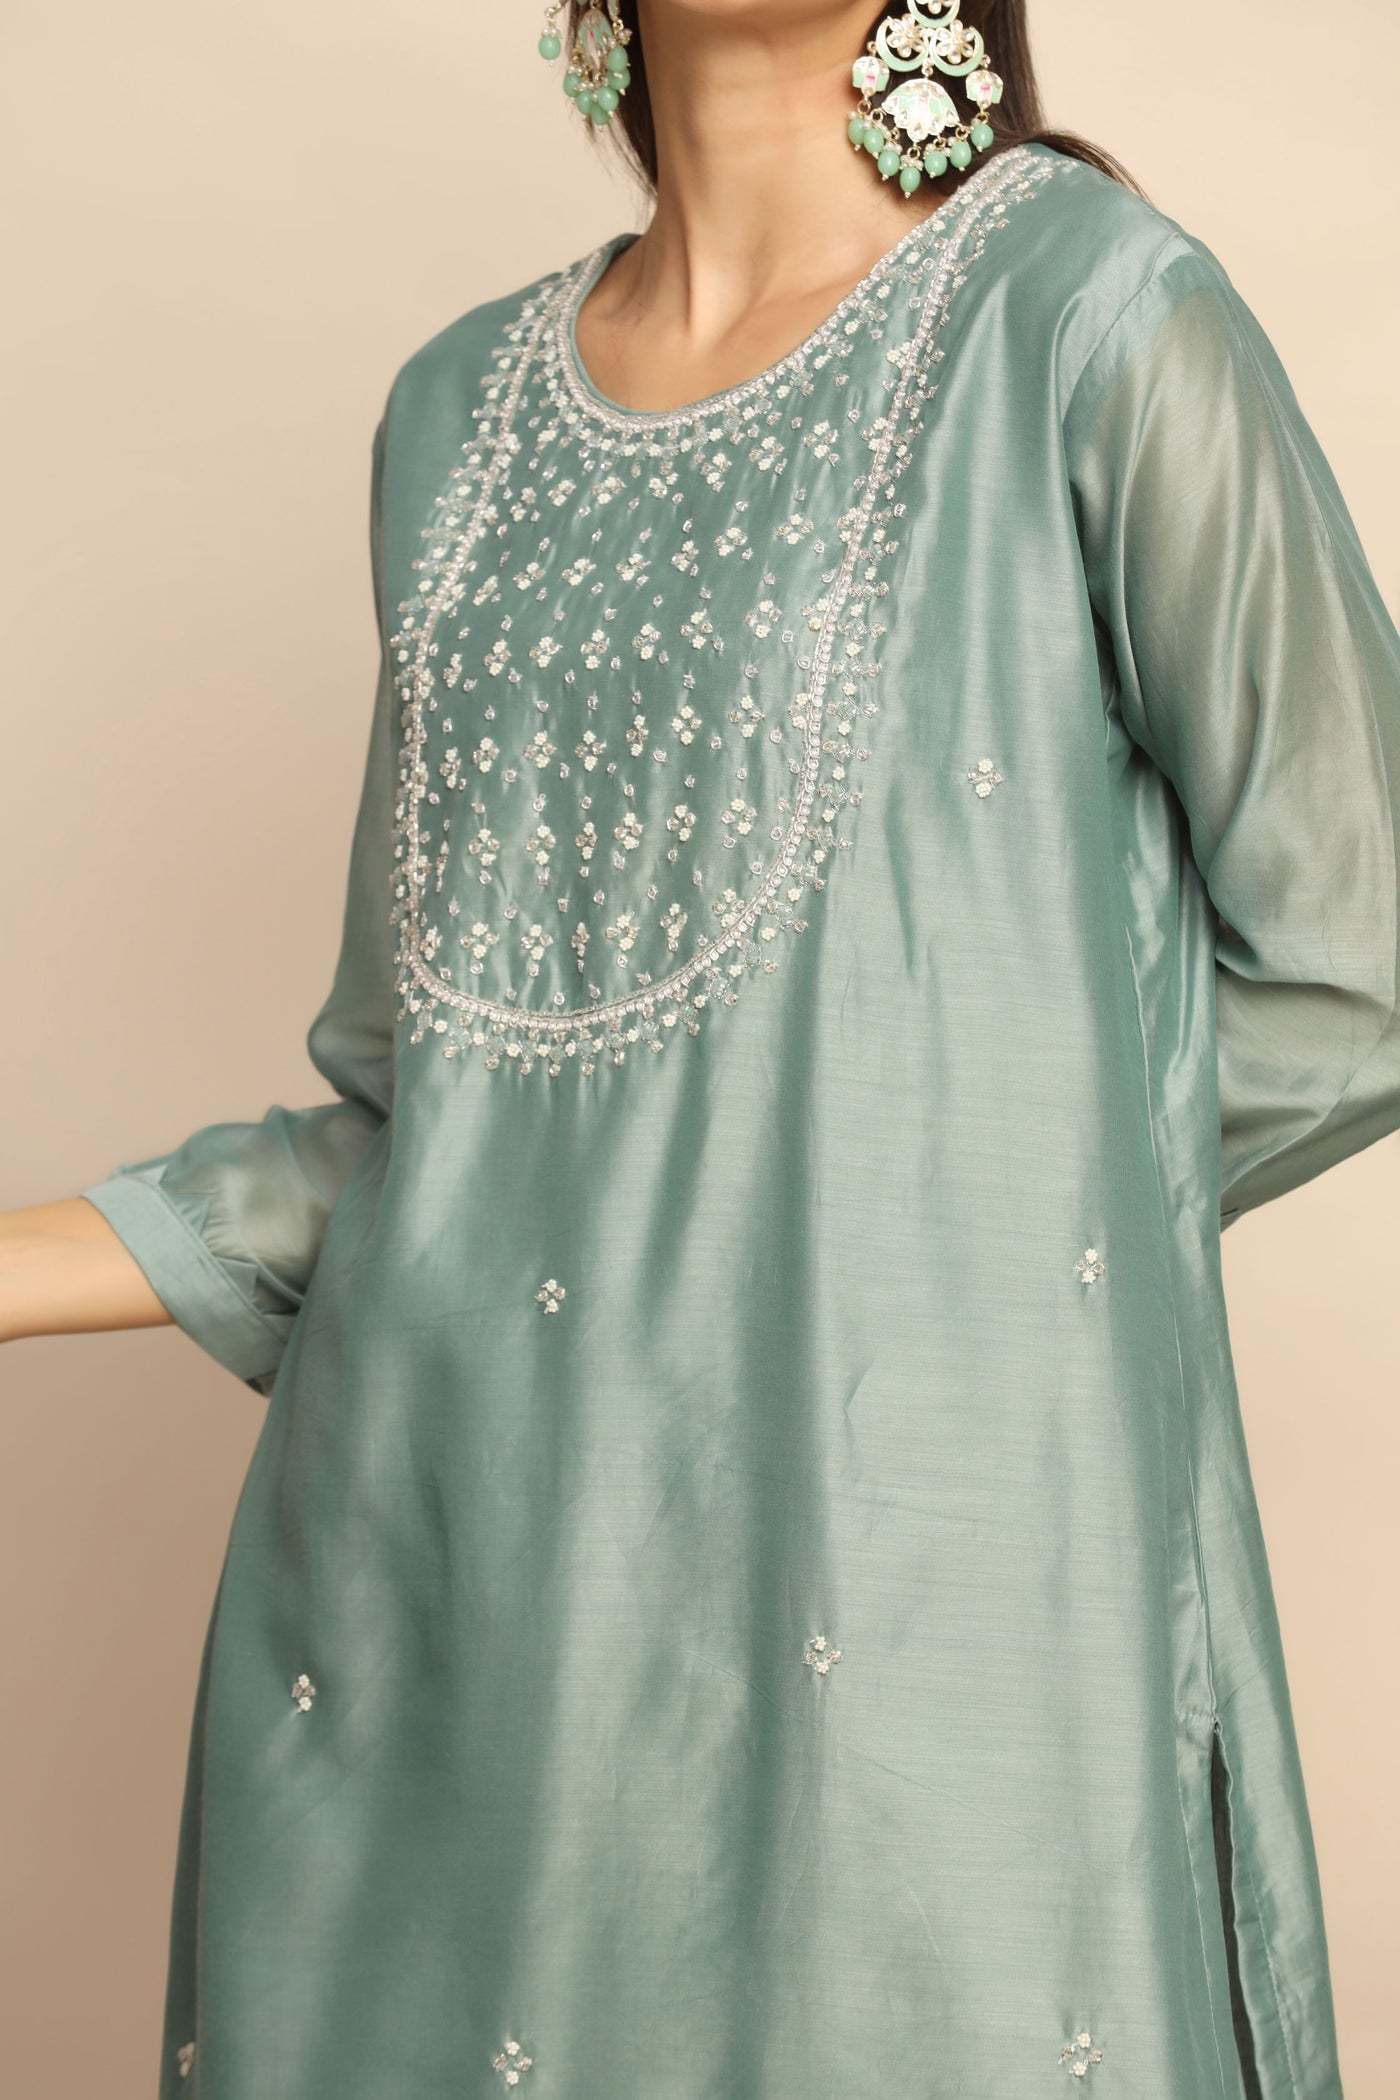 Elegant Mint Green Suit with Beads and Cut Dana